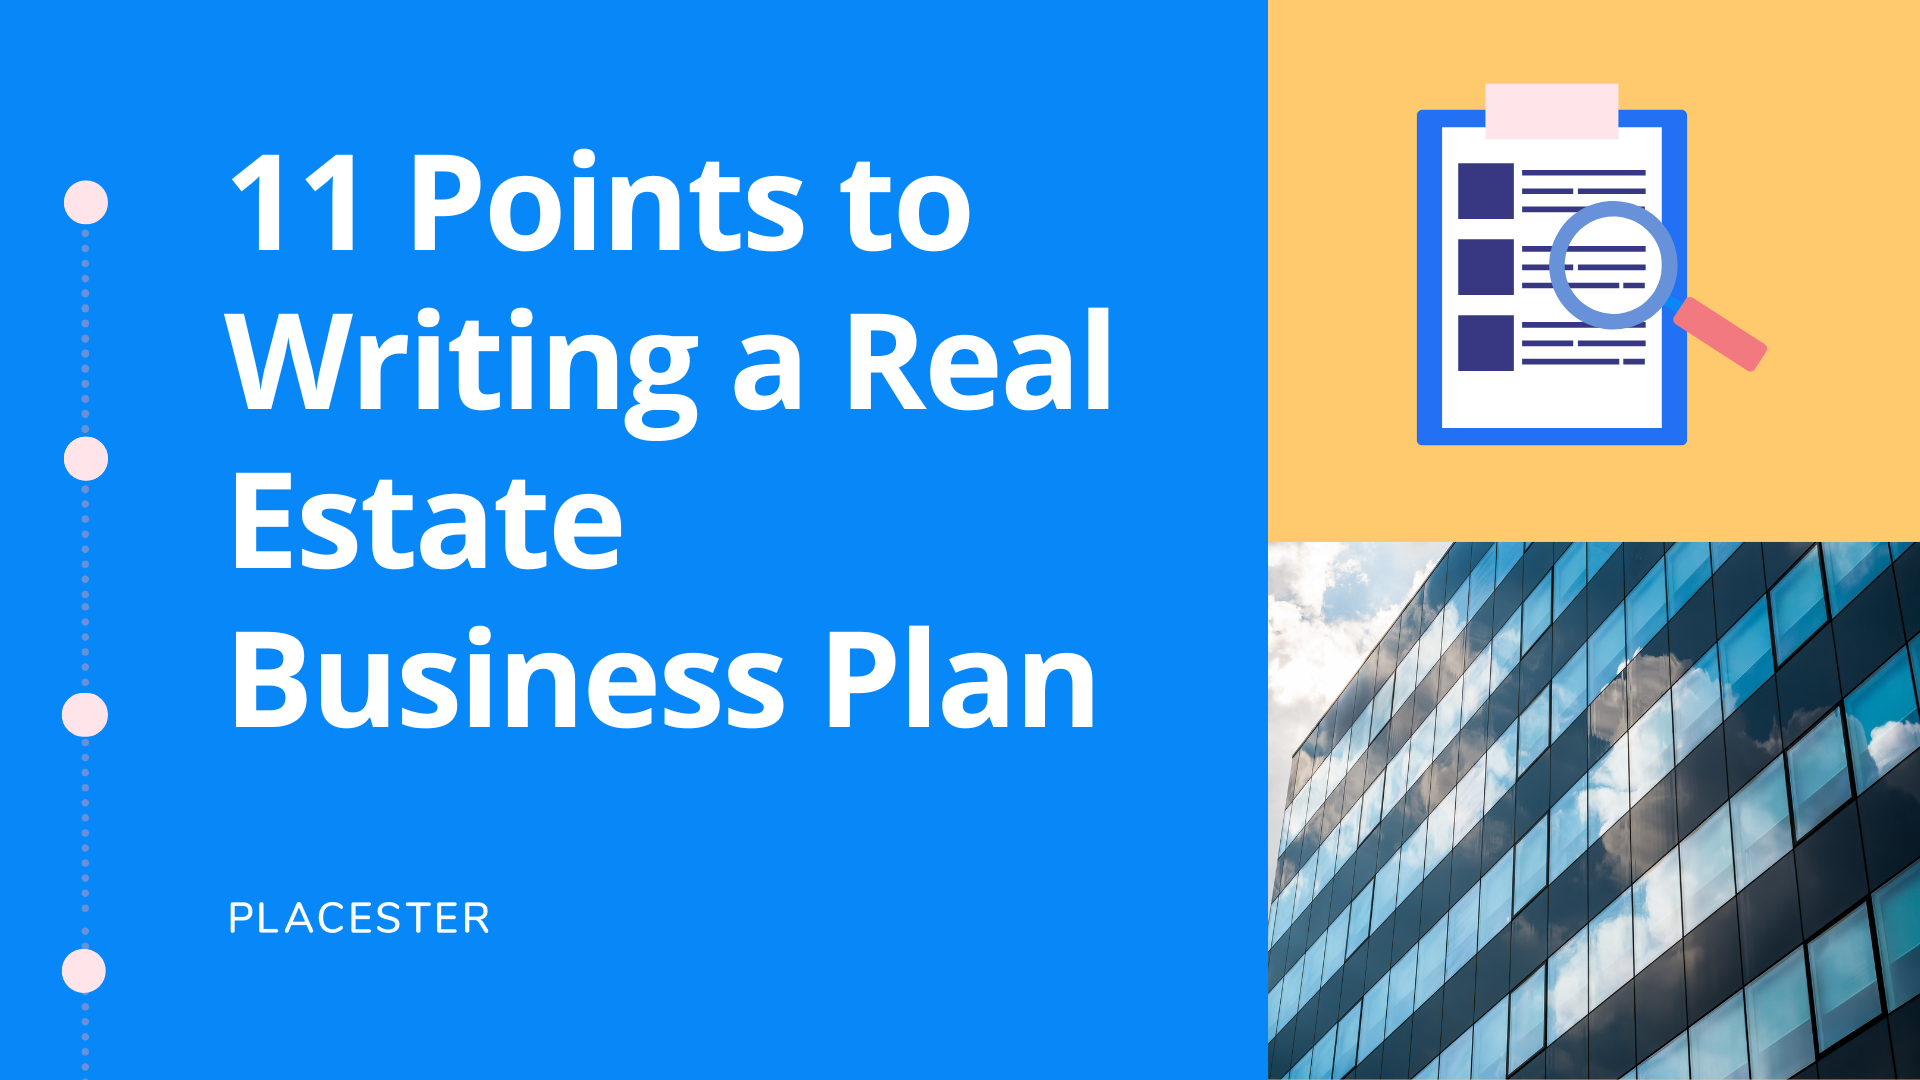 Ultimate Guide: 11 Points to Writing a Real Estate Business Plan